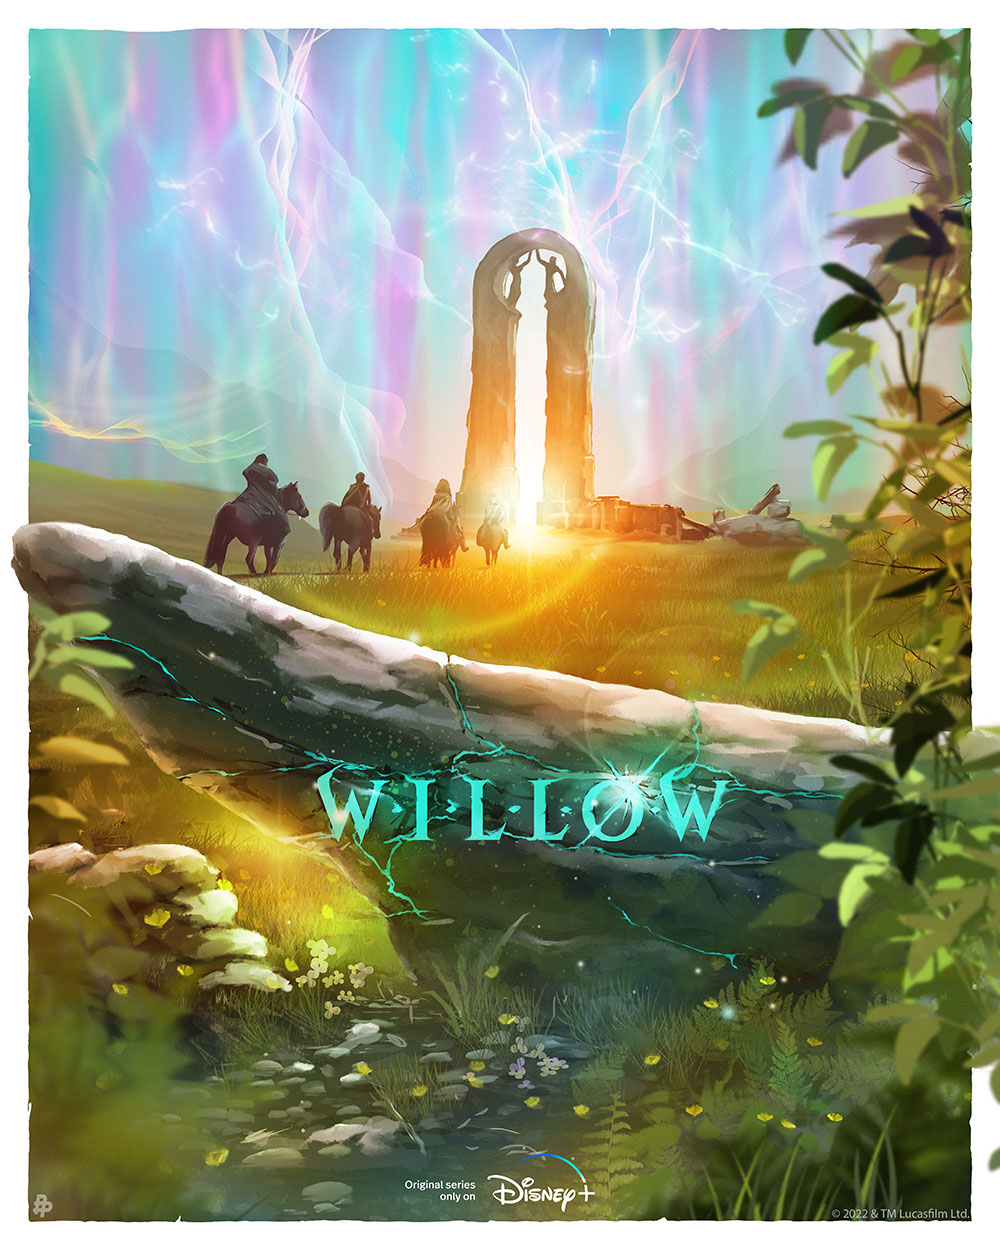 Official Disney Plus - Willow